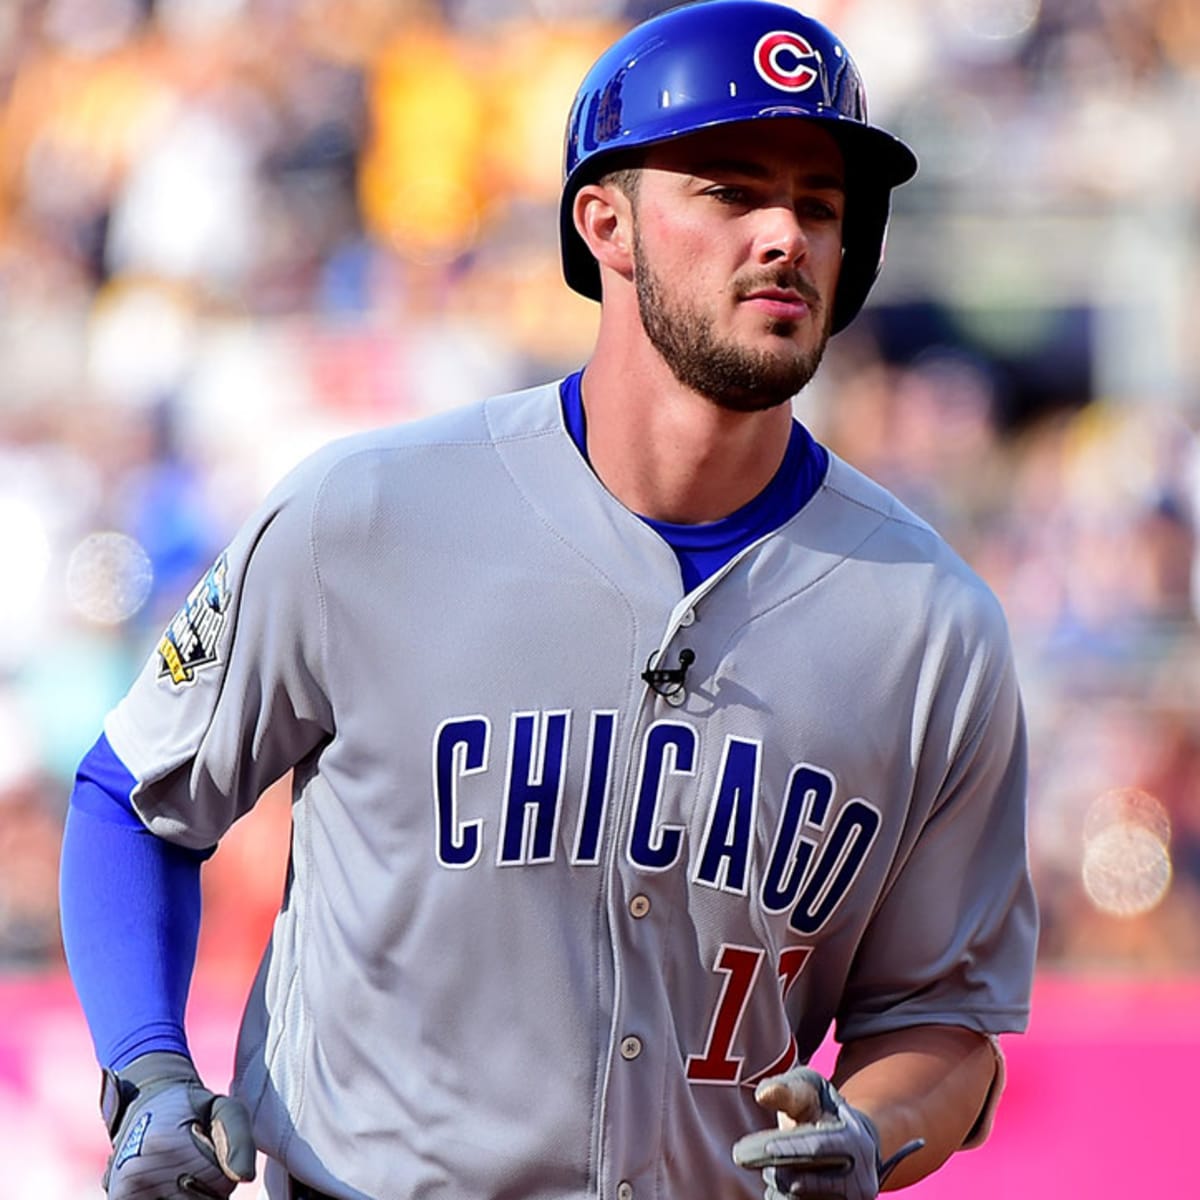 Cubs rookie Kris Bryant second in overall baseball jersey sales